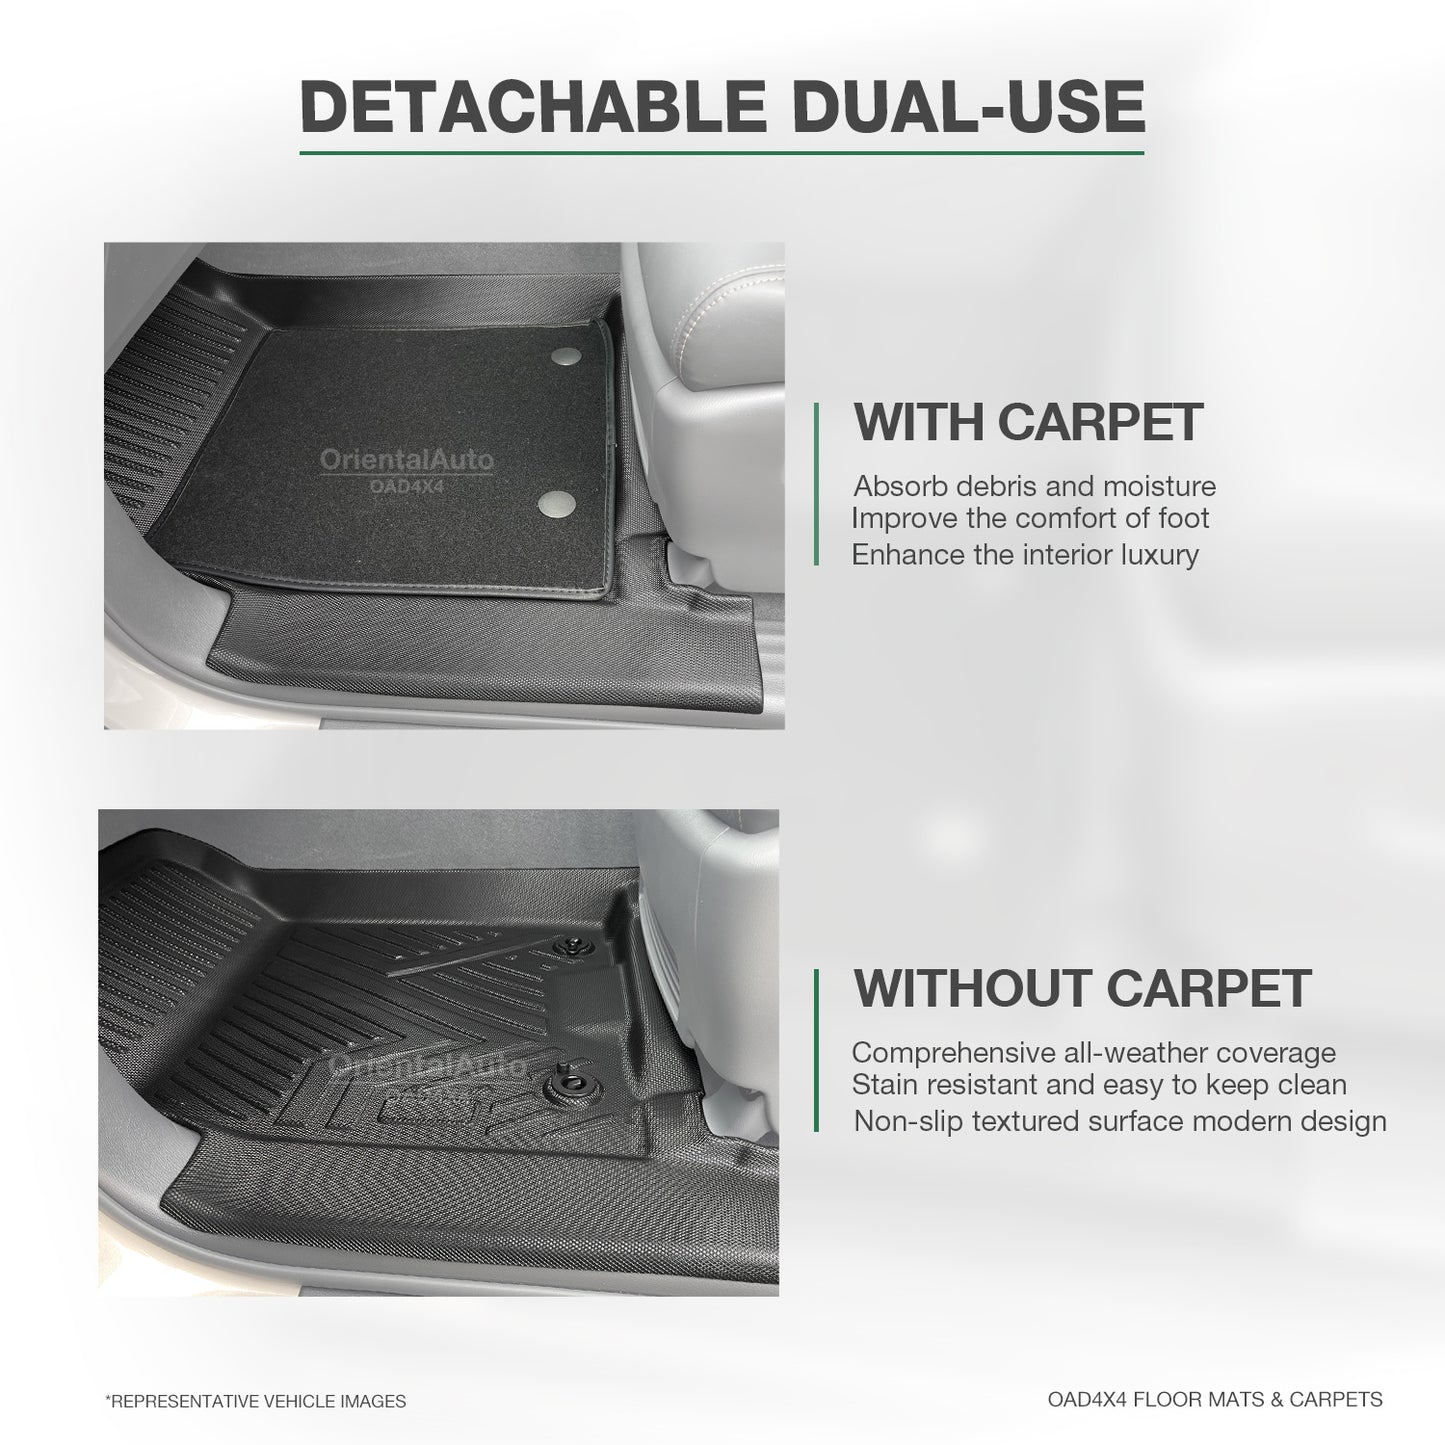 5D TPE Detachable Carpet Floor Mats for Toyota Hilux Auto Dual Cab 2015-Onwards Tailored Door Sill Covered Floor Mat Liner